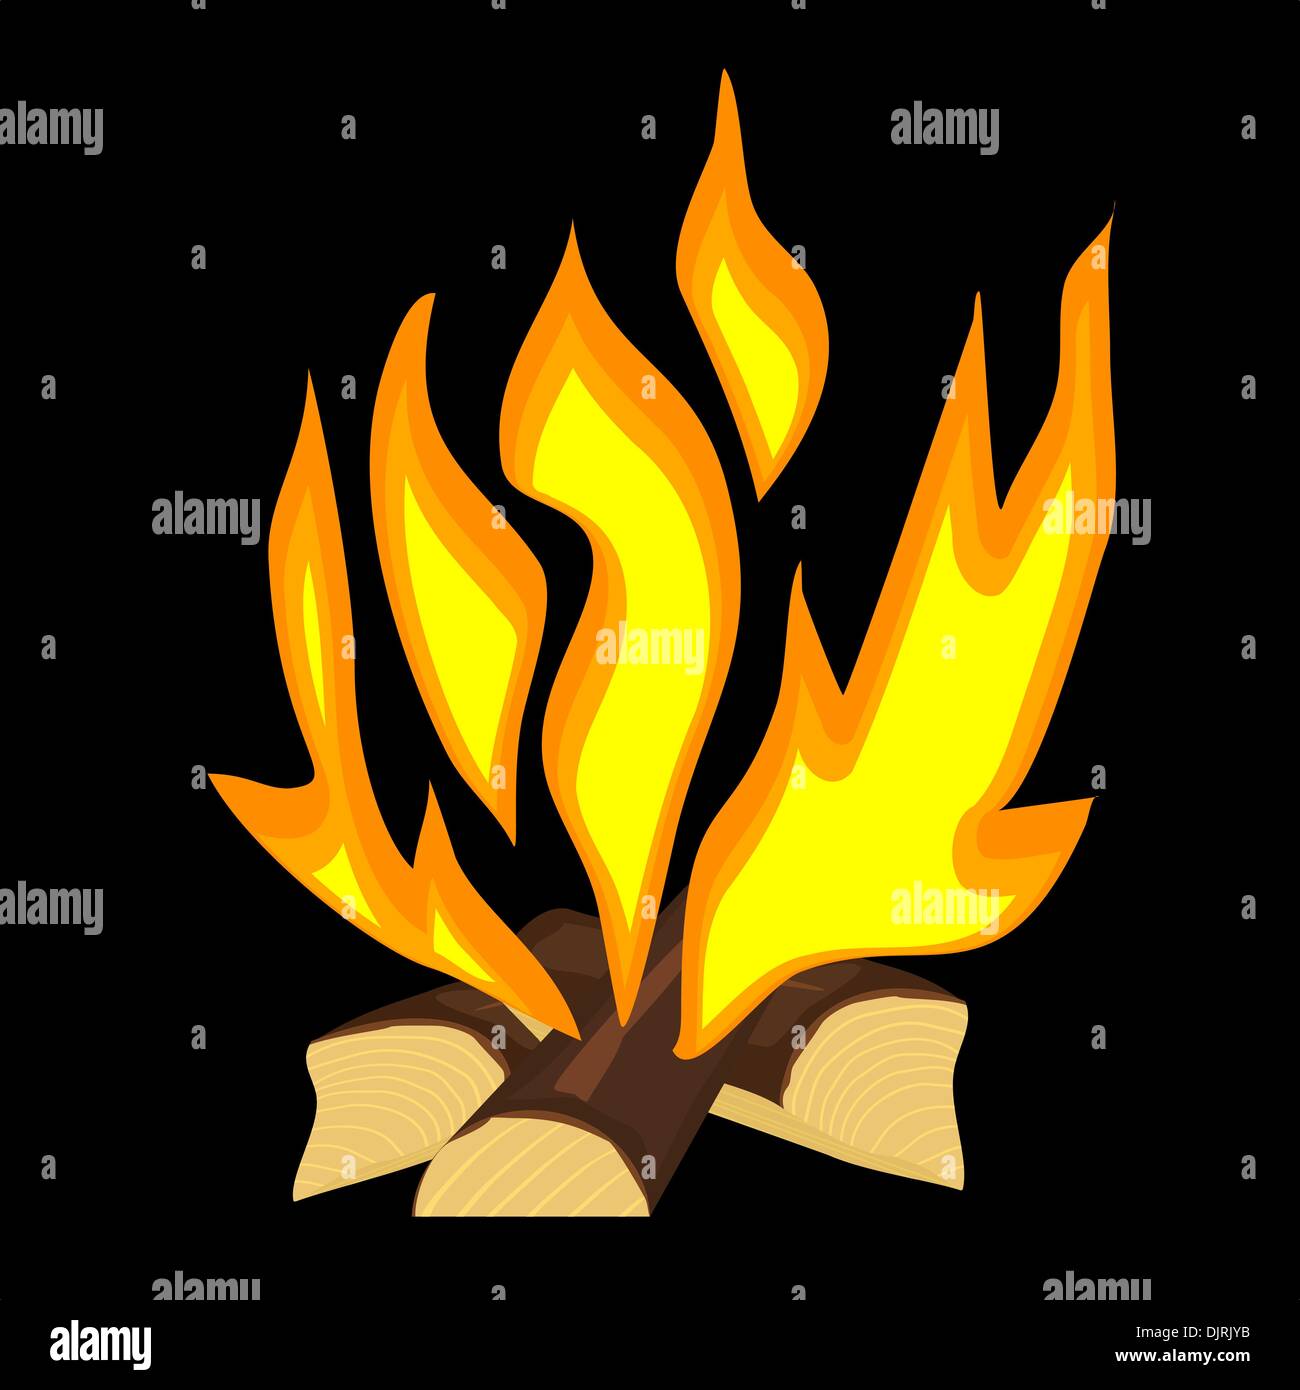 Vector illustration of a fire Stock Vector